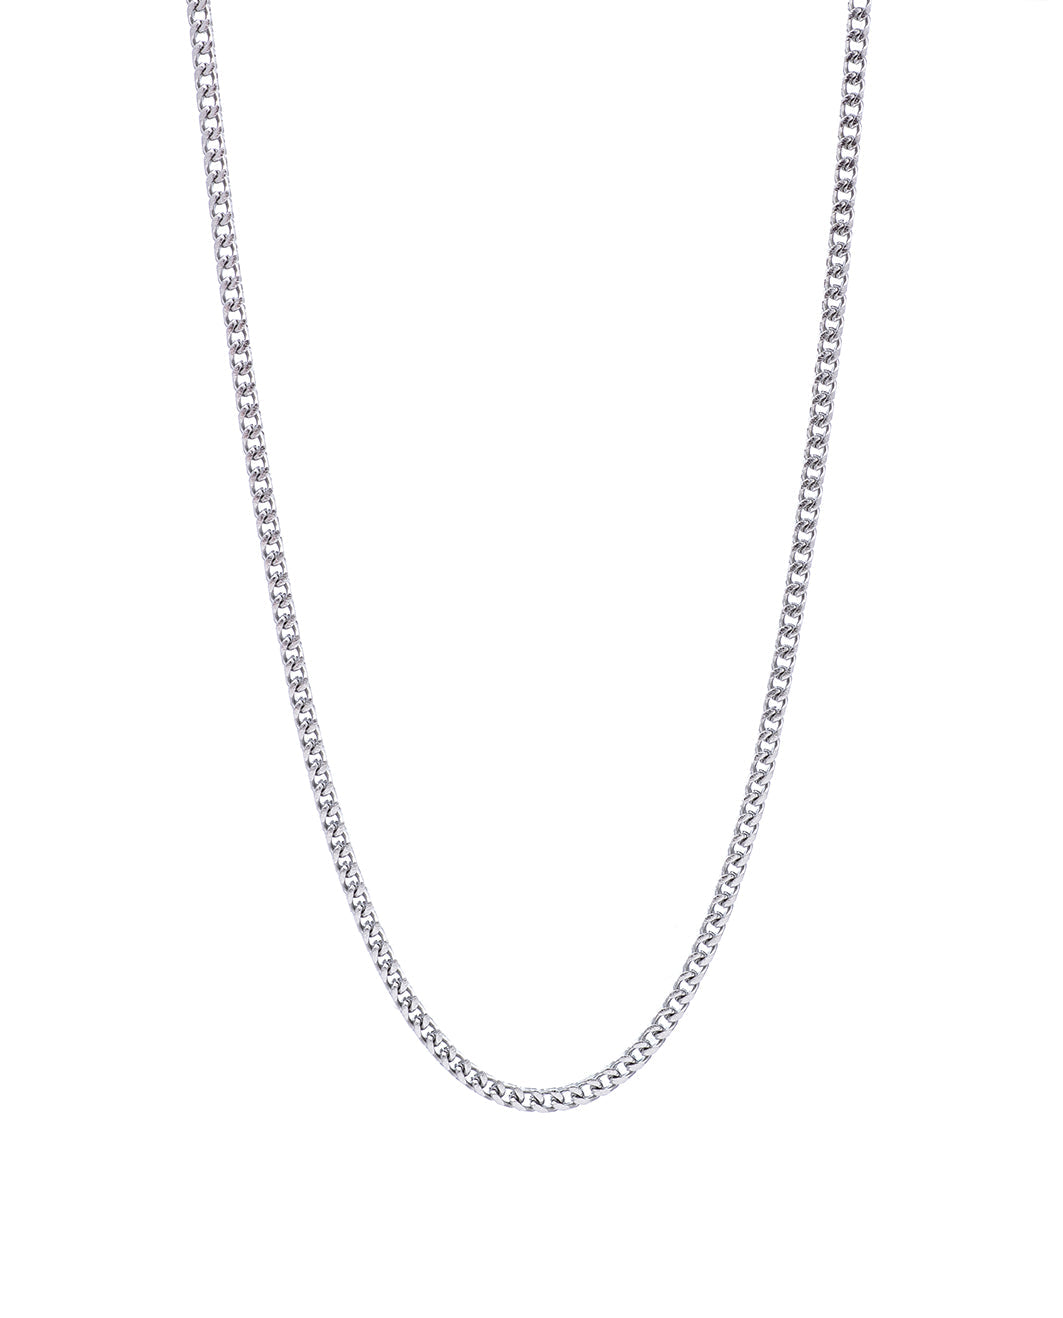 Square Links Silver Necklace